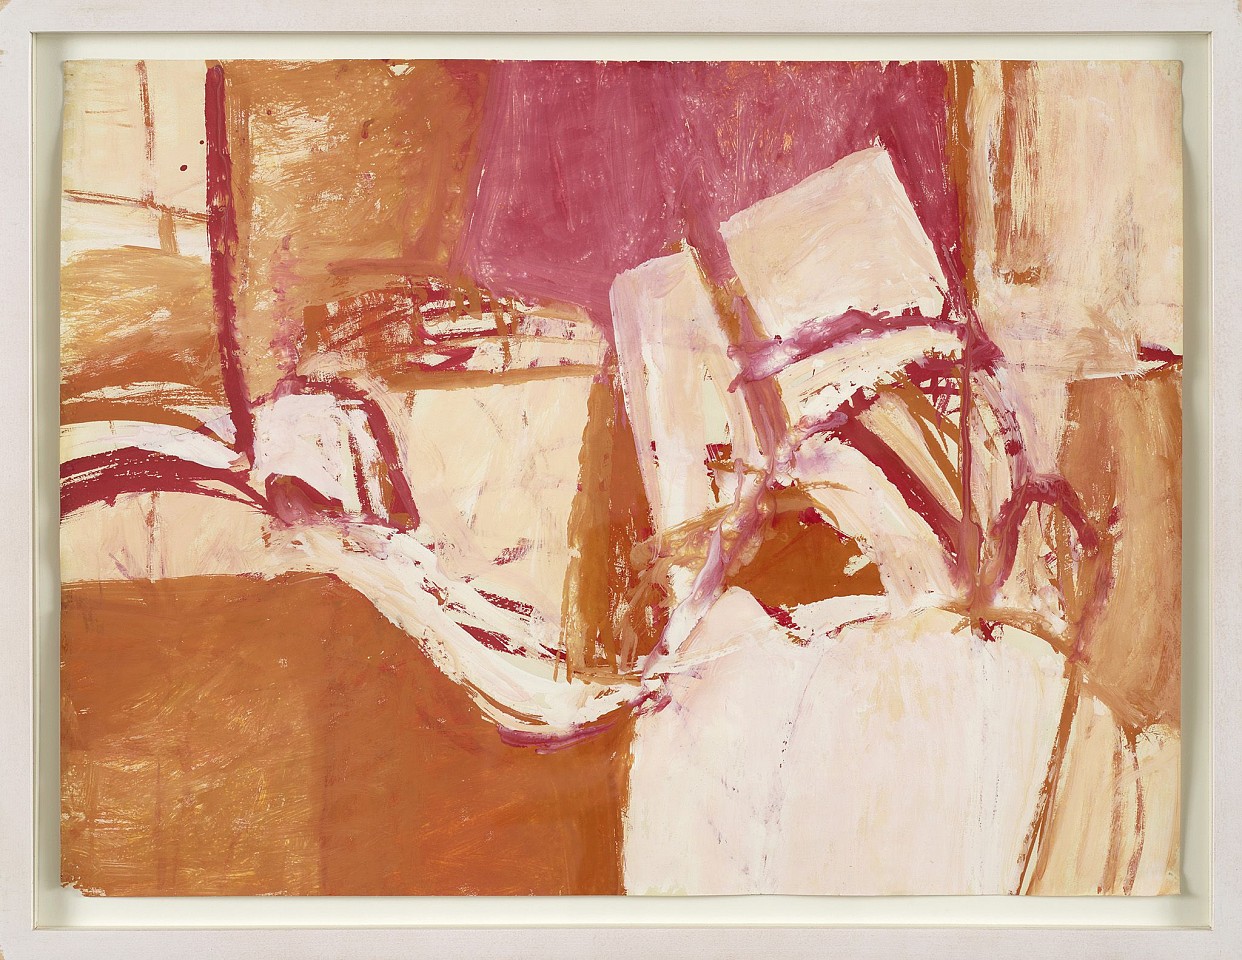 Charlotte Park, Untitled (Red, Orange, and White) | SOLD, c. 1955
Gouache on paper, 18 x 24 in. (45.7 x 61 cm)
PAR-00011